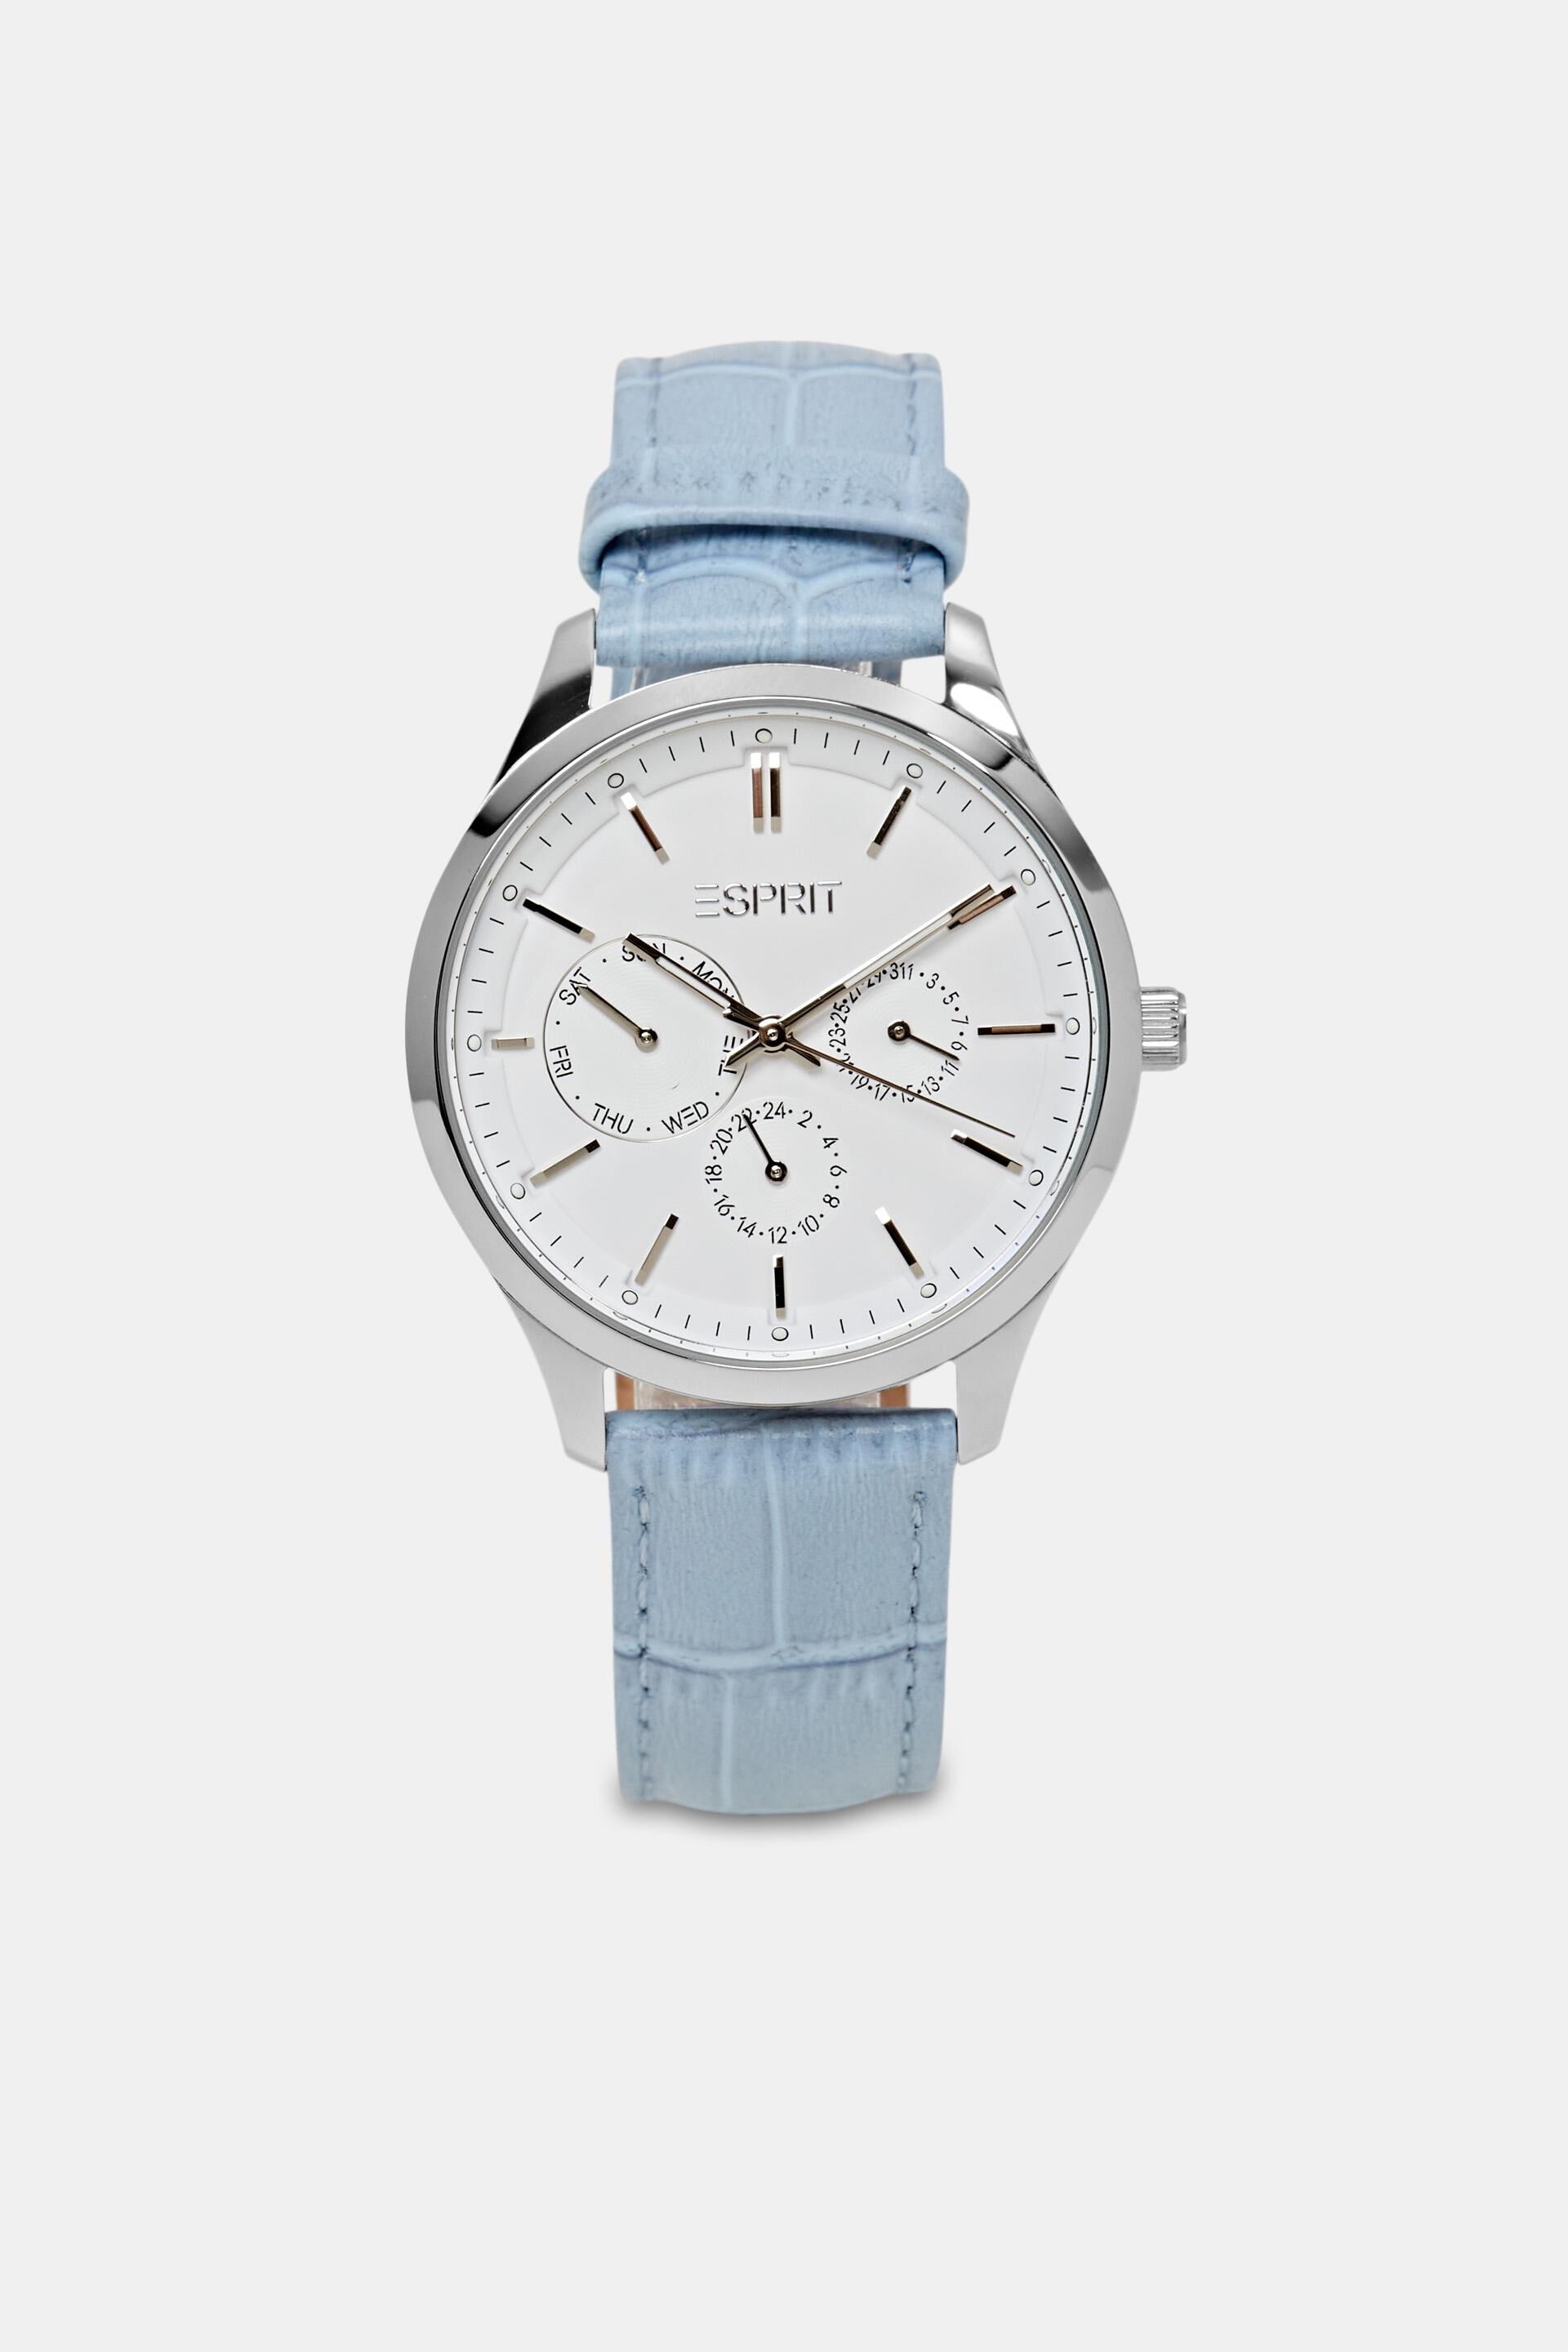 Esprit Multi-functional leather a watch with strap